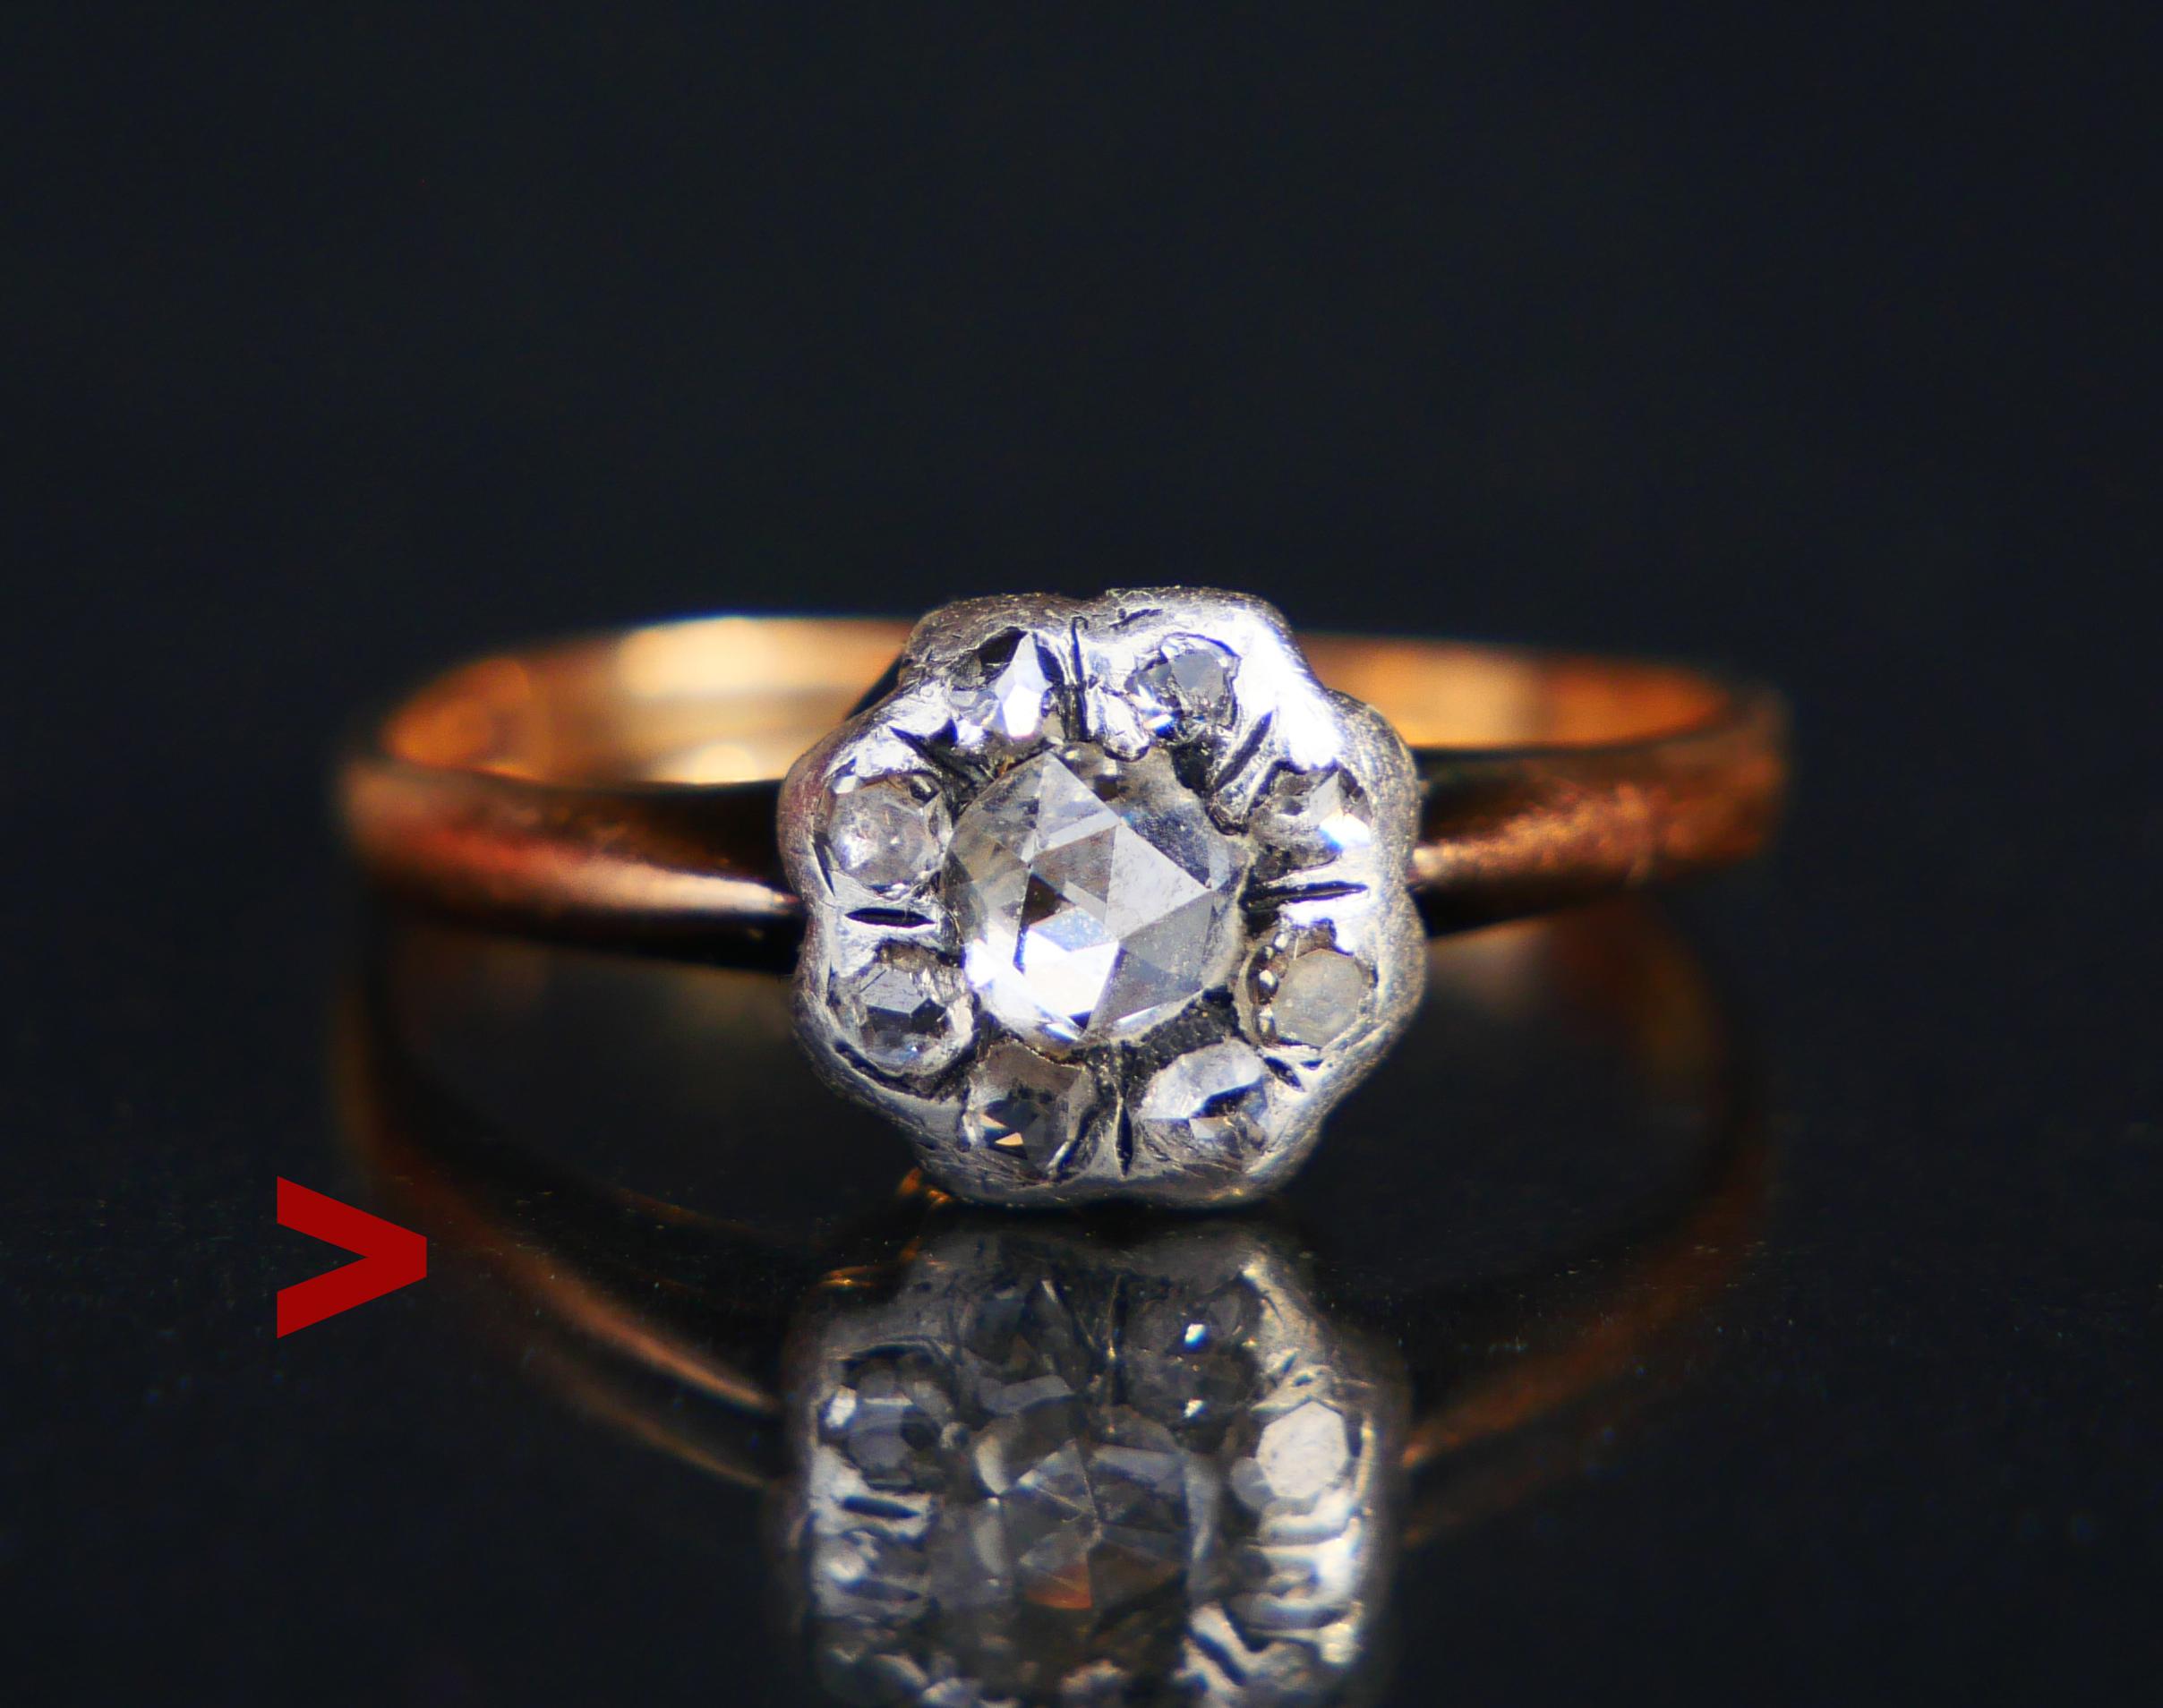 Old ring set with a silver cluster of nine rose-cut diamonds attached to 18K Gold hoop.

Hallmarked 18K , no maker's marks. Made in Europe ca 1900s -1920s

Measurements: crown is Ø 8 mm x 4 mm deep.
All stones have open backs. Largest stone in the